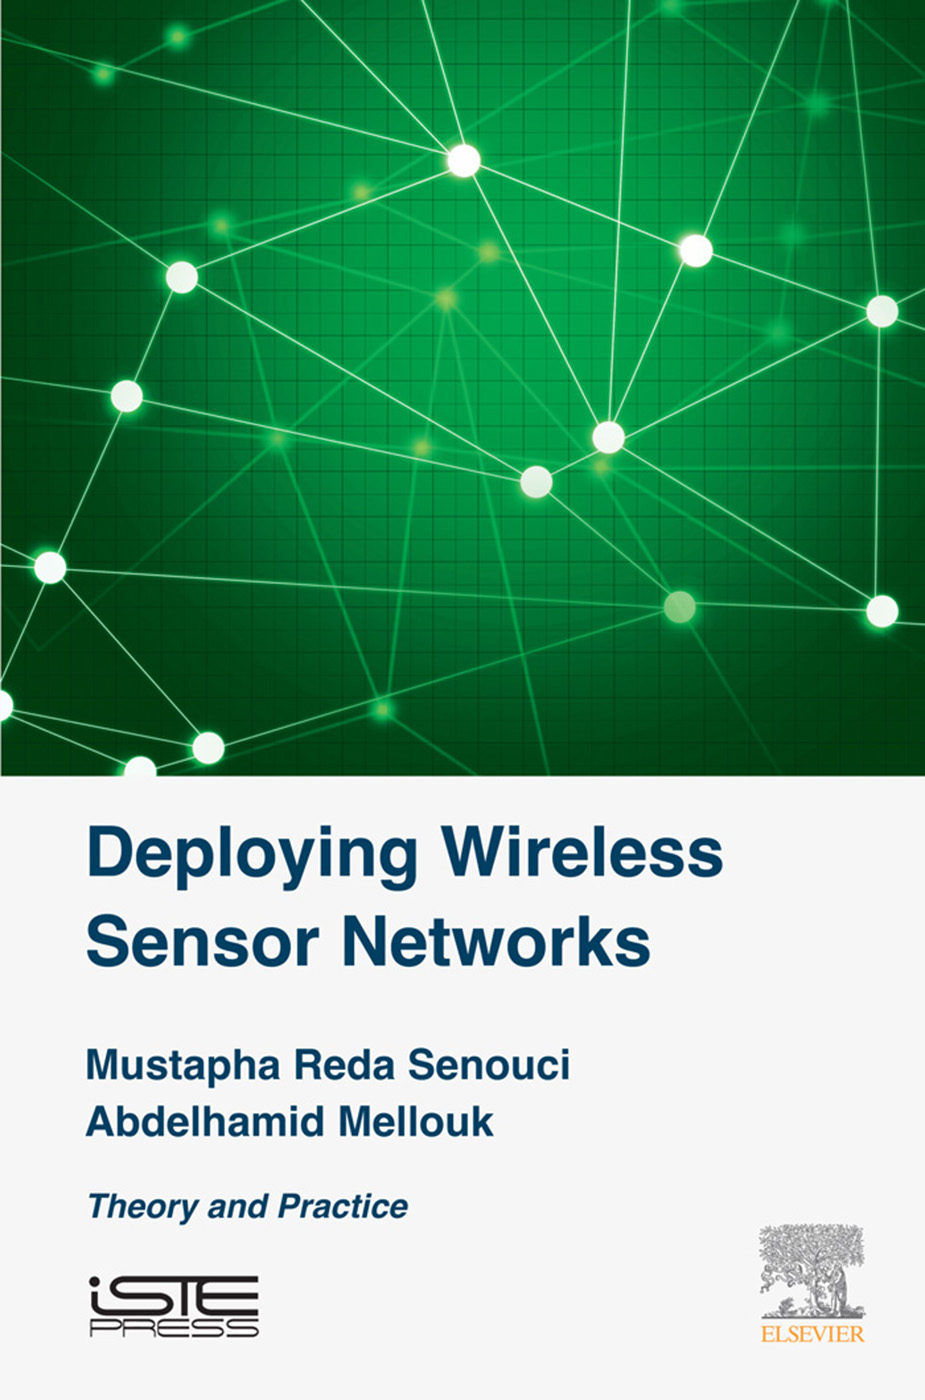 Deploying Wireless Sensor Networks: Theory and Practice